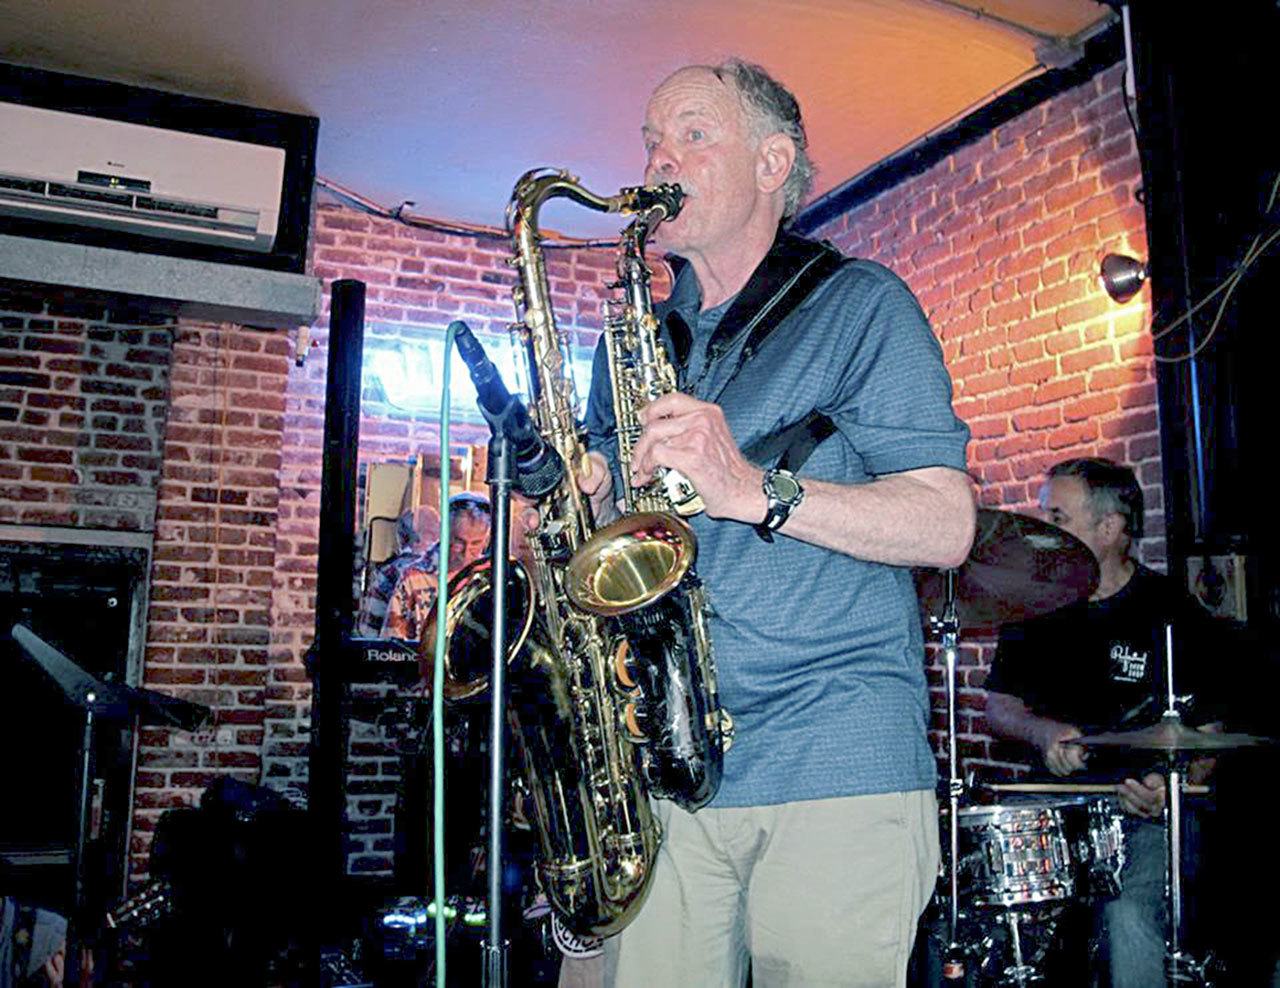 St. Luke’s Epsicopal Church, 525 N. Fifth Ave., in Sequim, will host Music Live with Lunch at noon Tuesday featuring saxophonist Craig Buhler, seen here, and pianist Gary McRoberts.